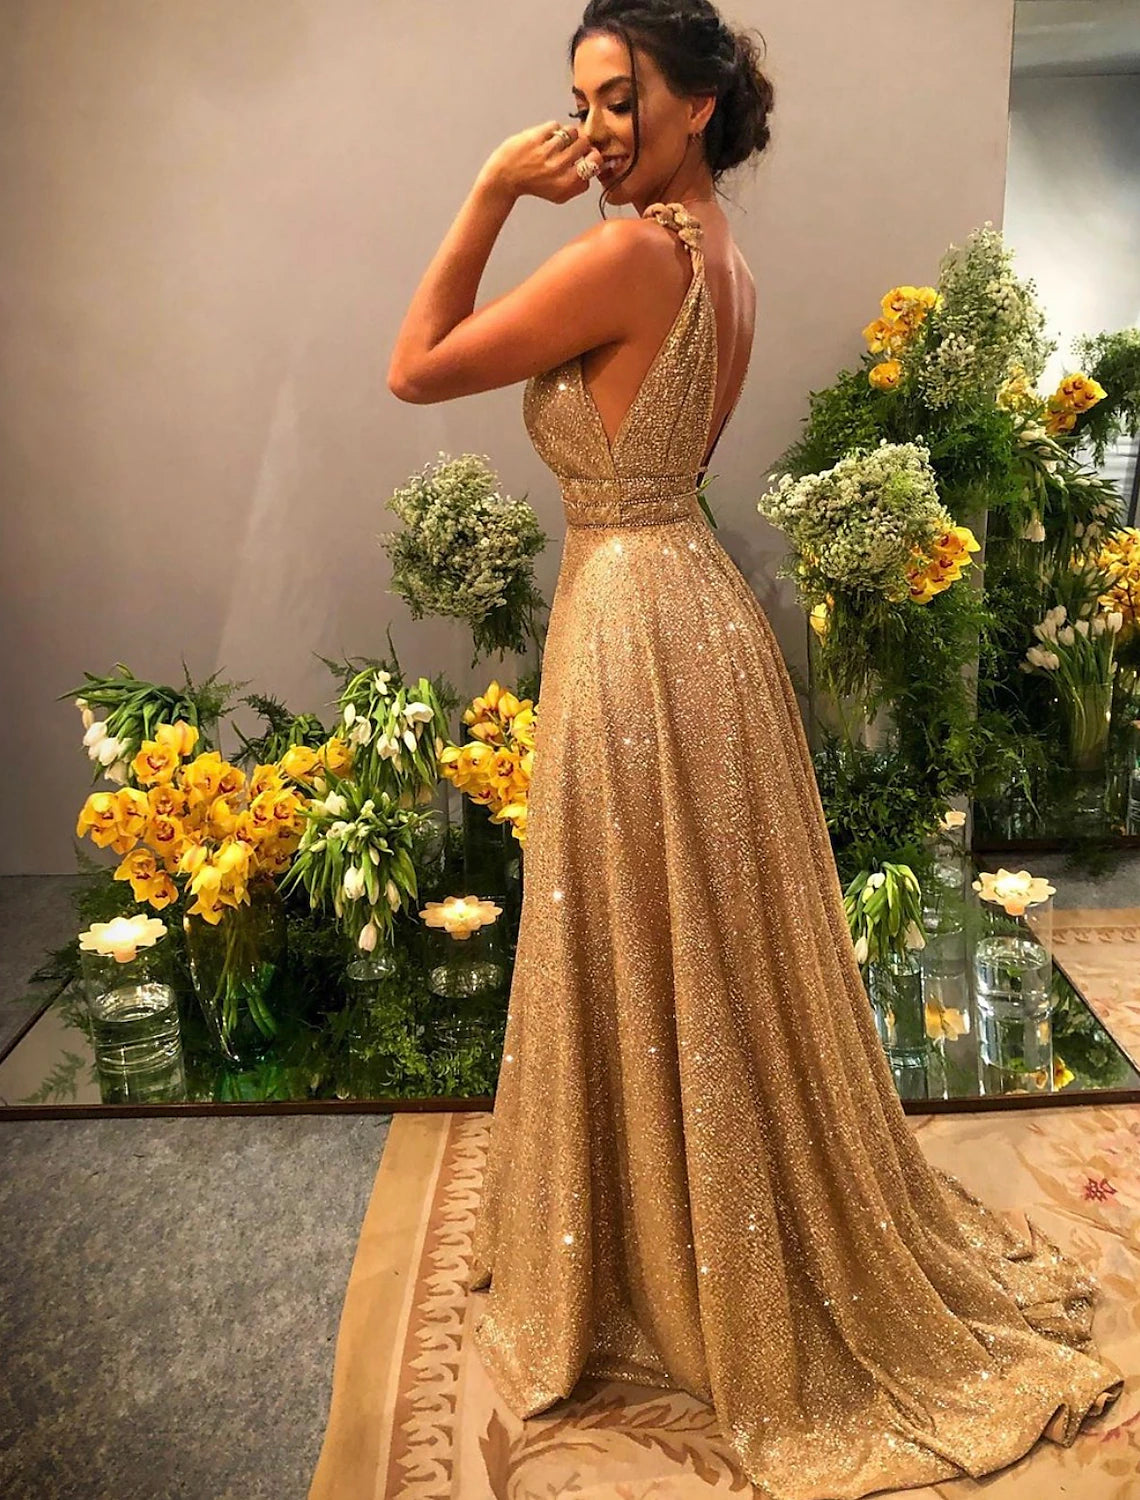 Wholesale  A-Line Prom Dresses Glittering Dress Evening Party Formal Evening Sweep / Brush Train Sleeveless Spaghetti Strap Stretch Satin Backless with Rhinestone